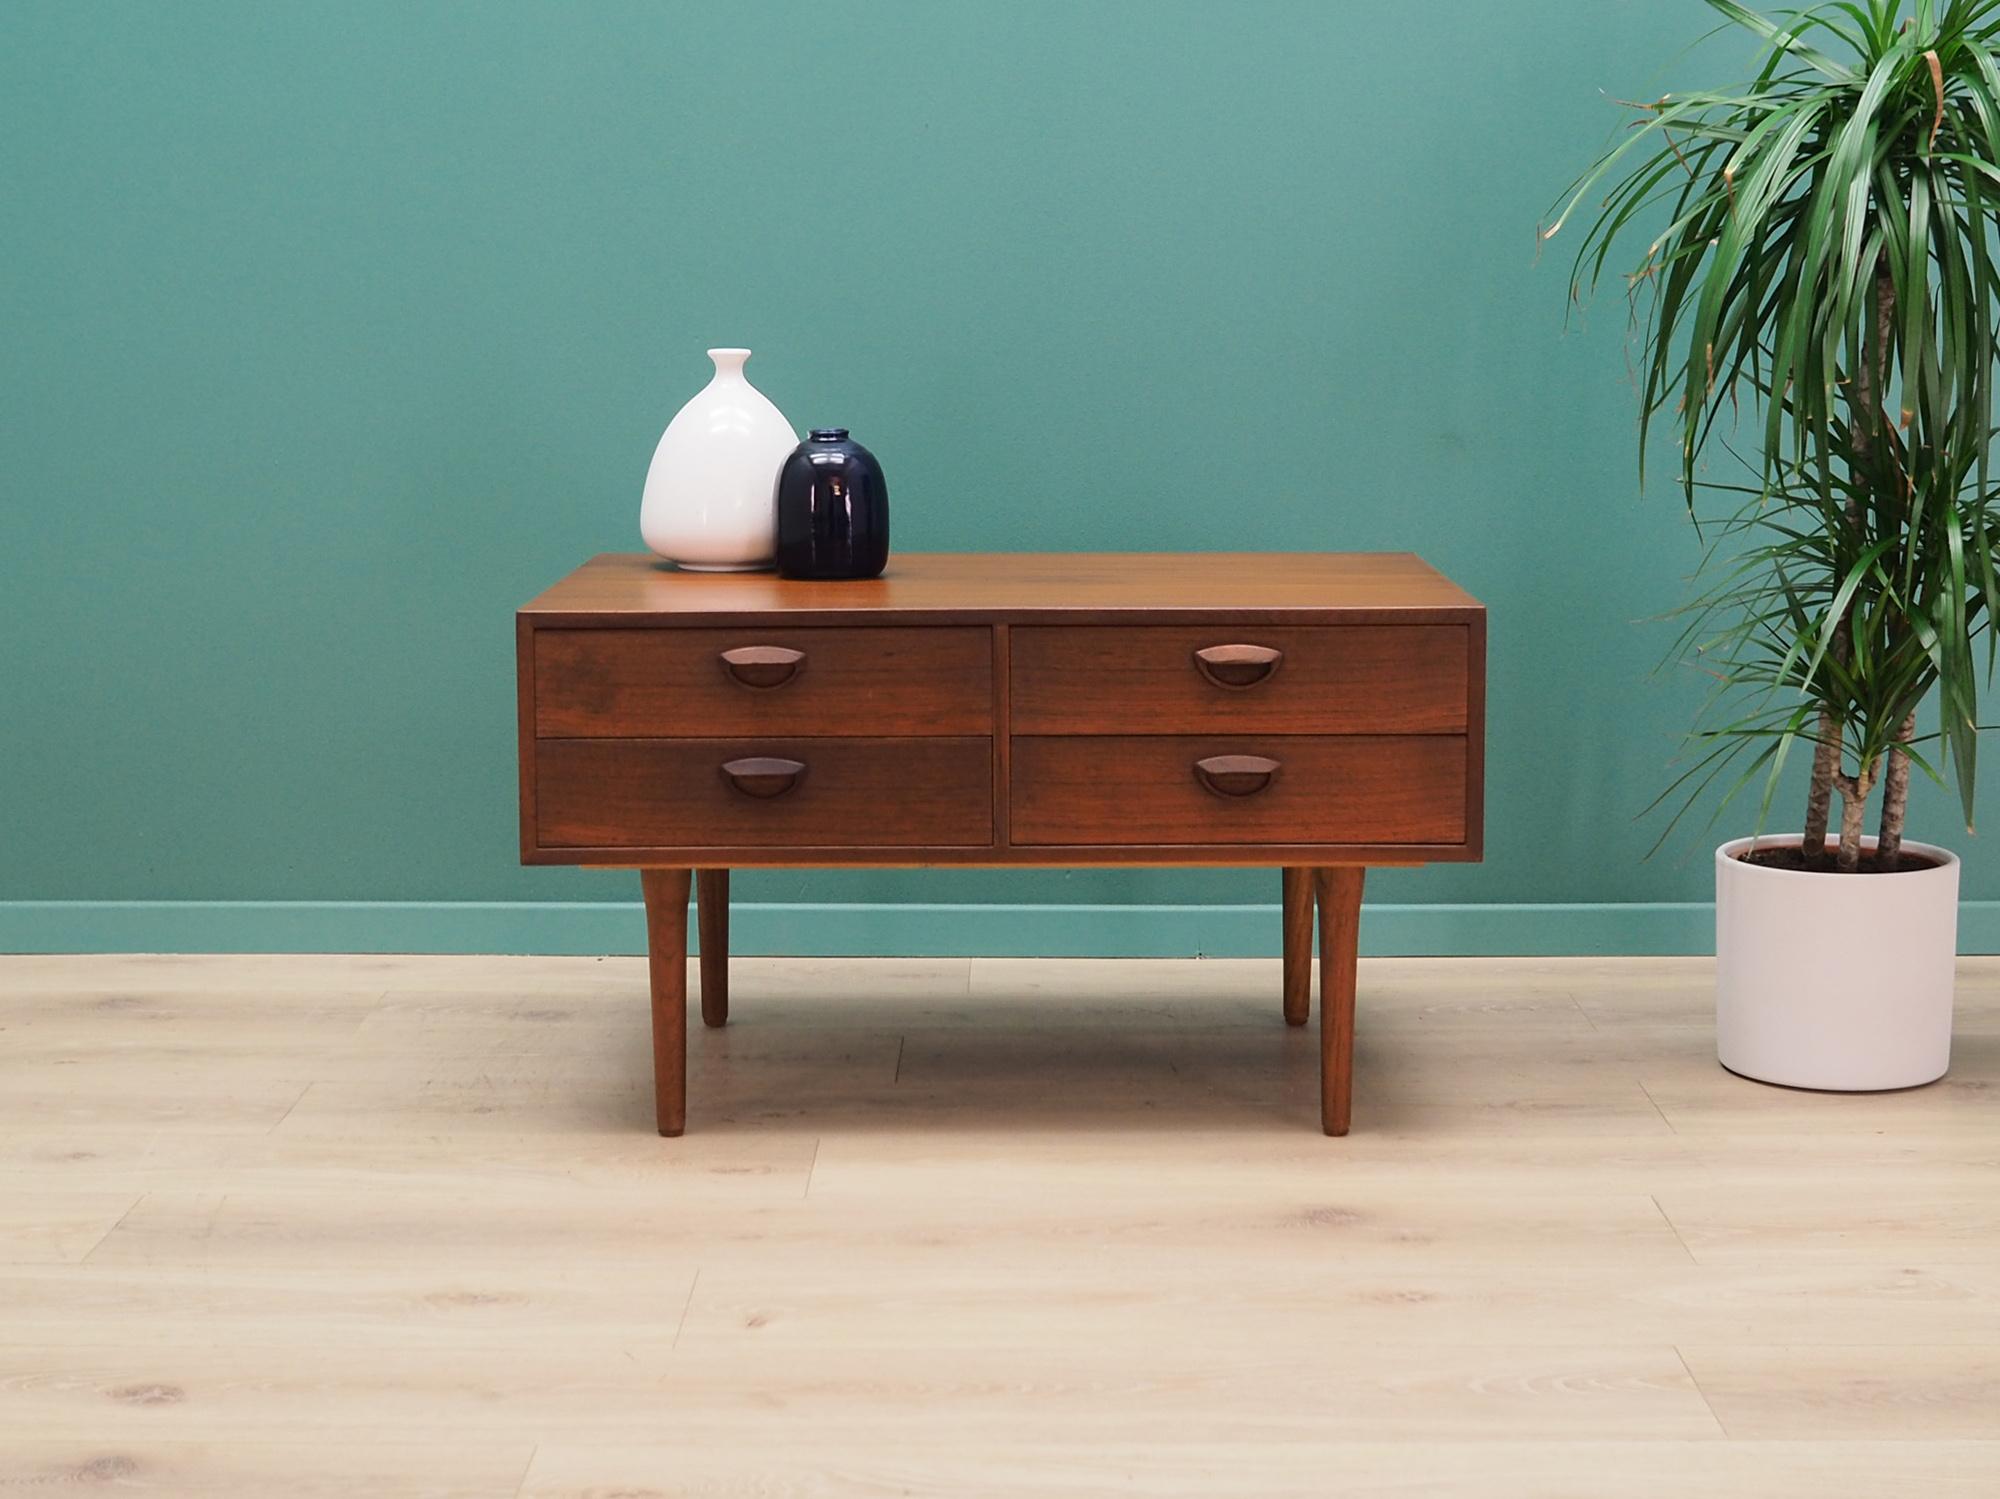 Fantastic chest of drawers from the 1960s-1970s. Scandinavian design, Minimalist form. The furniture is covered with teak veneer, legs are made of solid teak wood. Designed by Kai Kristiansen. The chest of drawers has four stylish drawers arranged